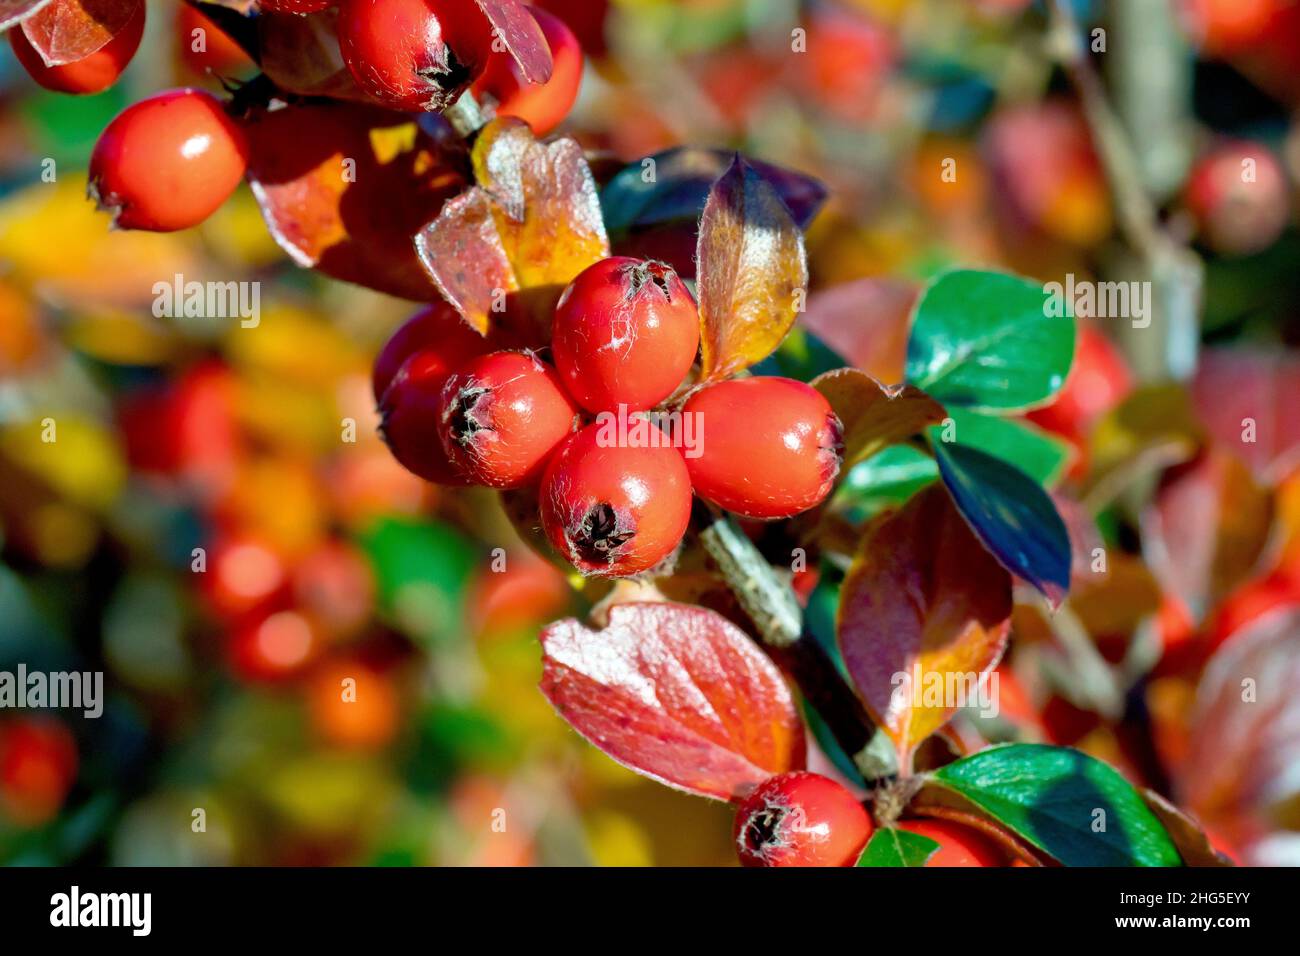 Close up showing open ended red berries or fruits growing on a shrub, possibly a variety of Cotoneaster. Stock Photo